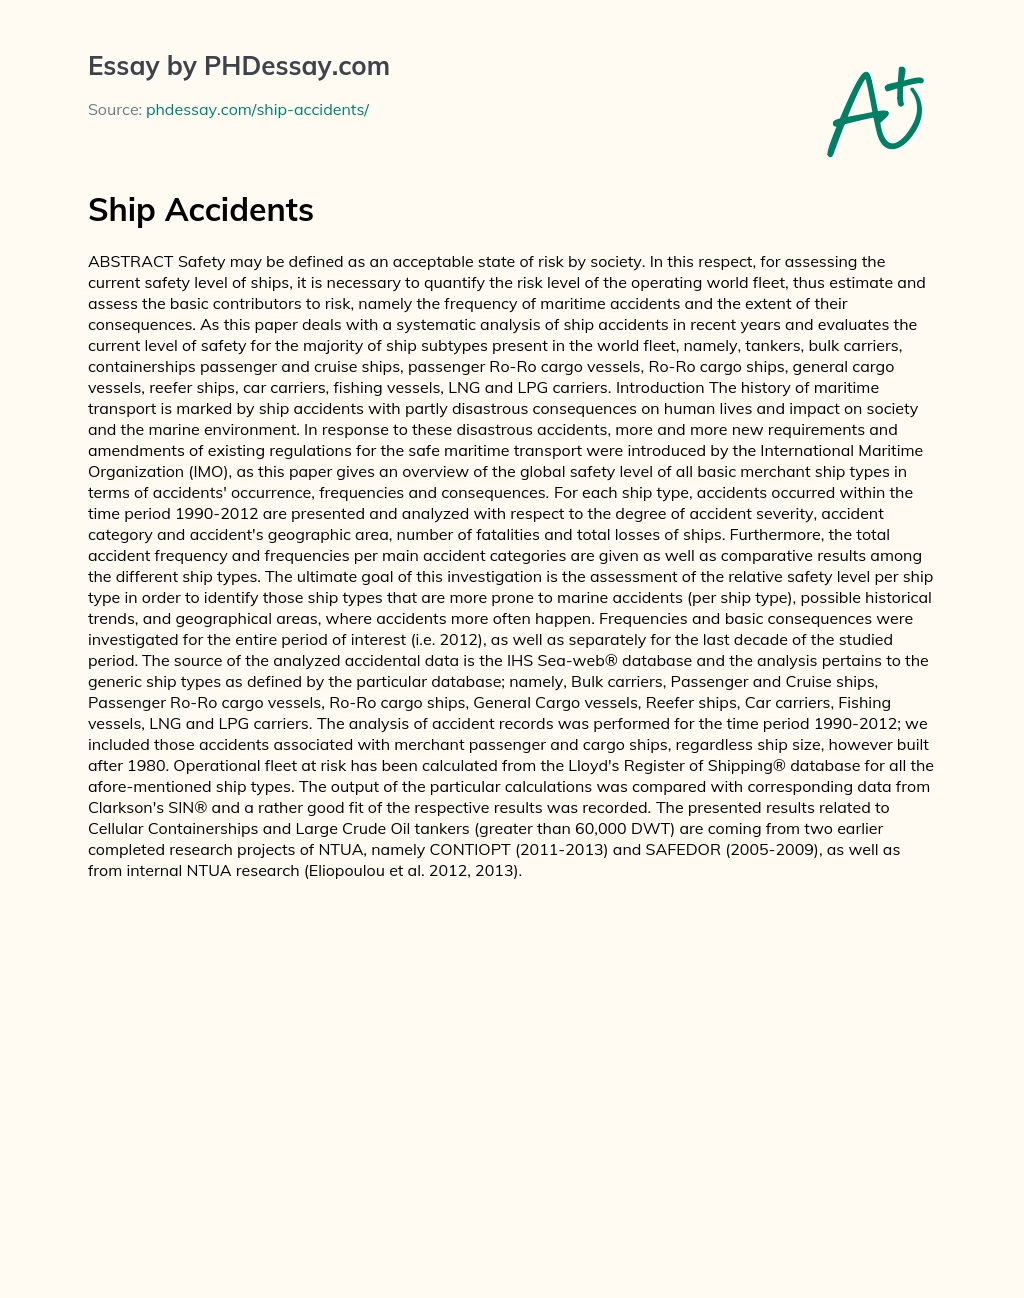 Ship Accidents essay